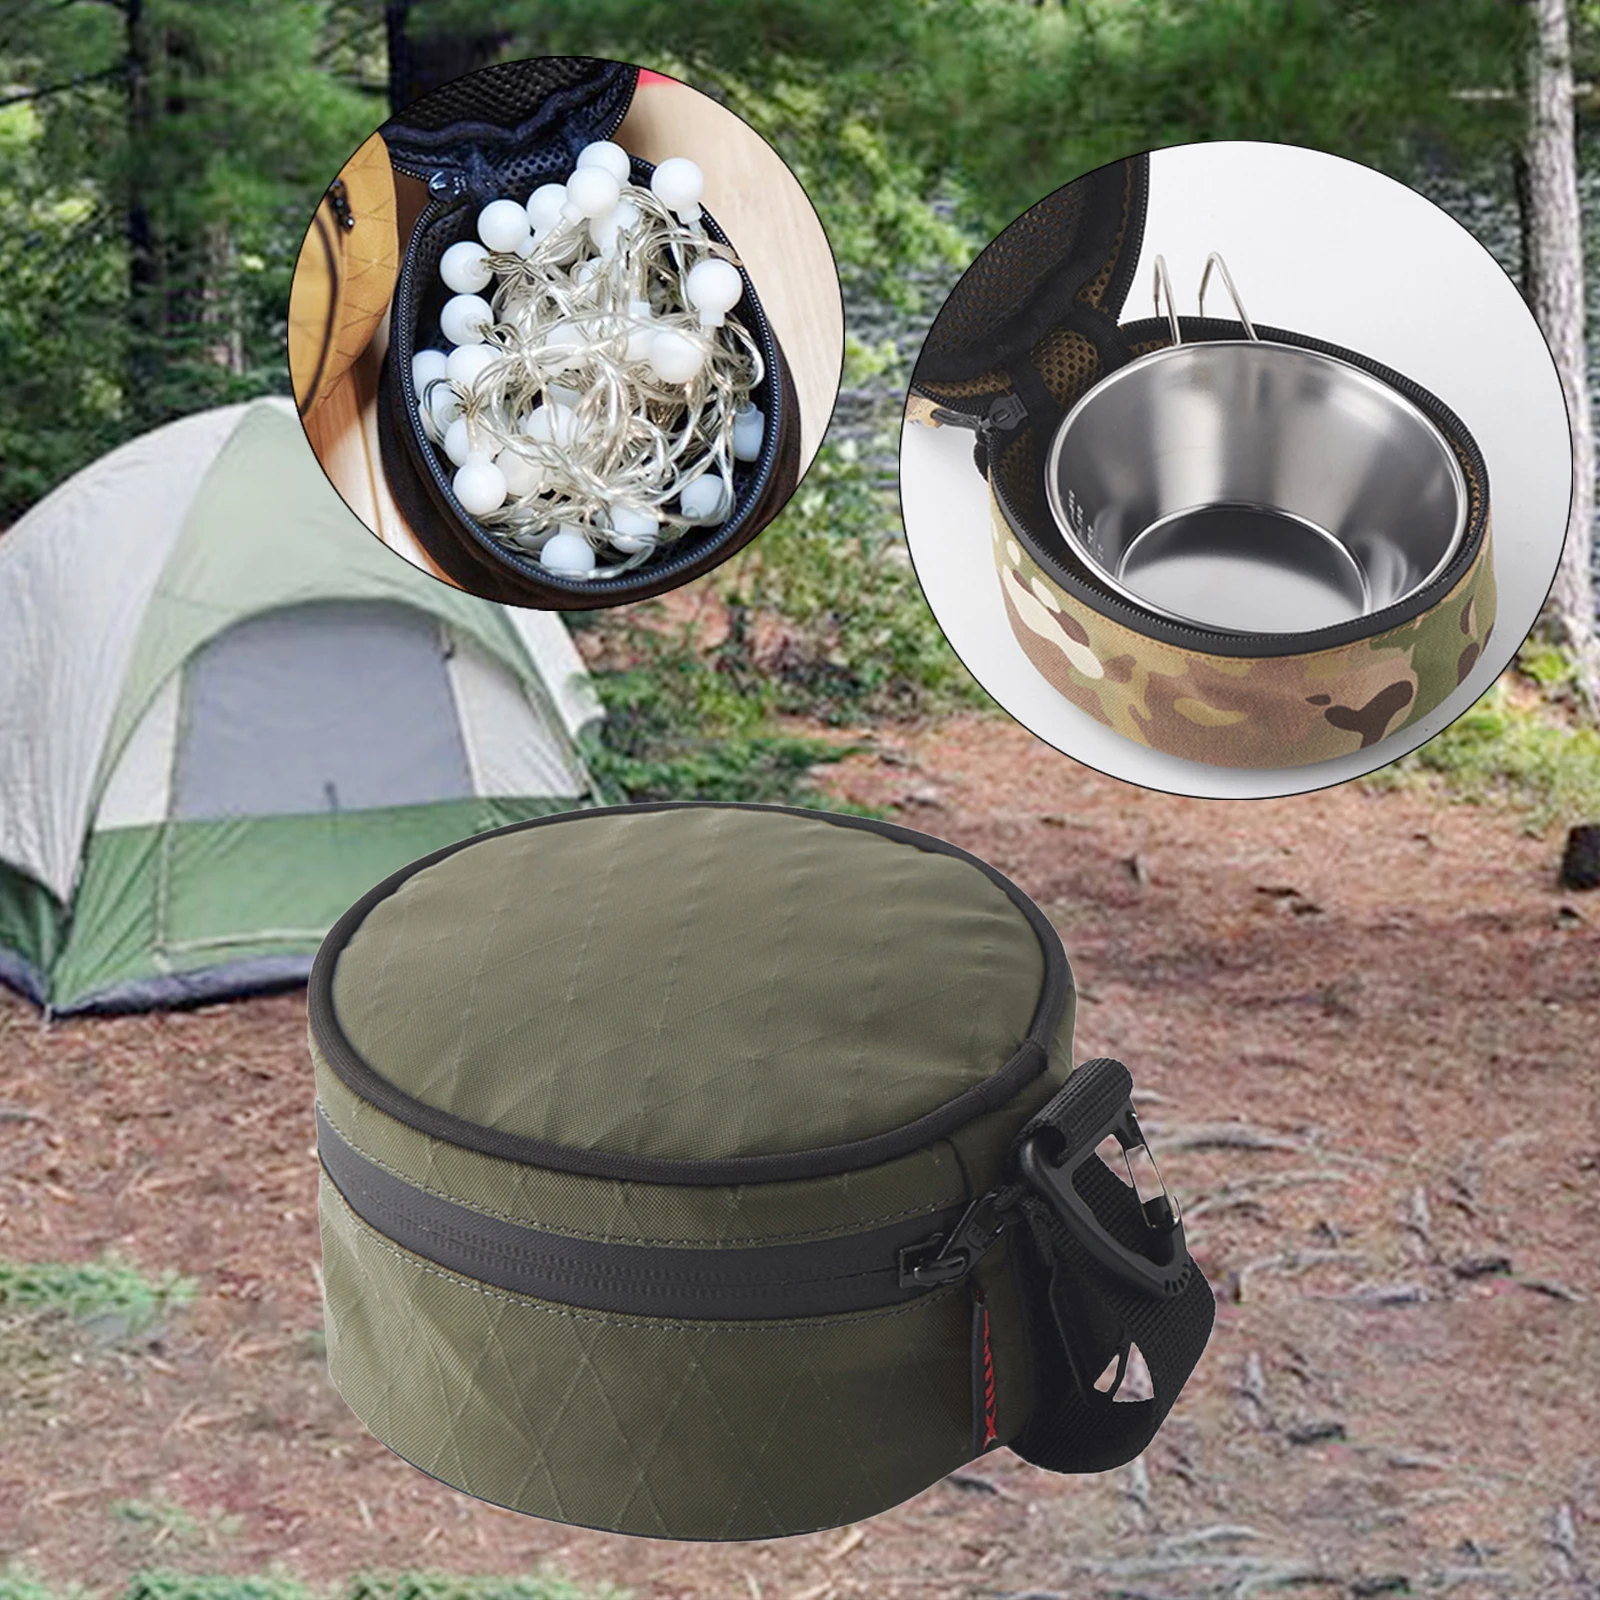 Outdoor Camping  Cup Storage Bag Hand-Held Carrying Bag Holder w/Hooks